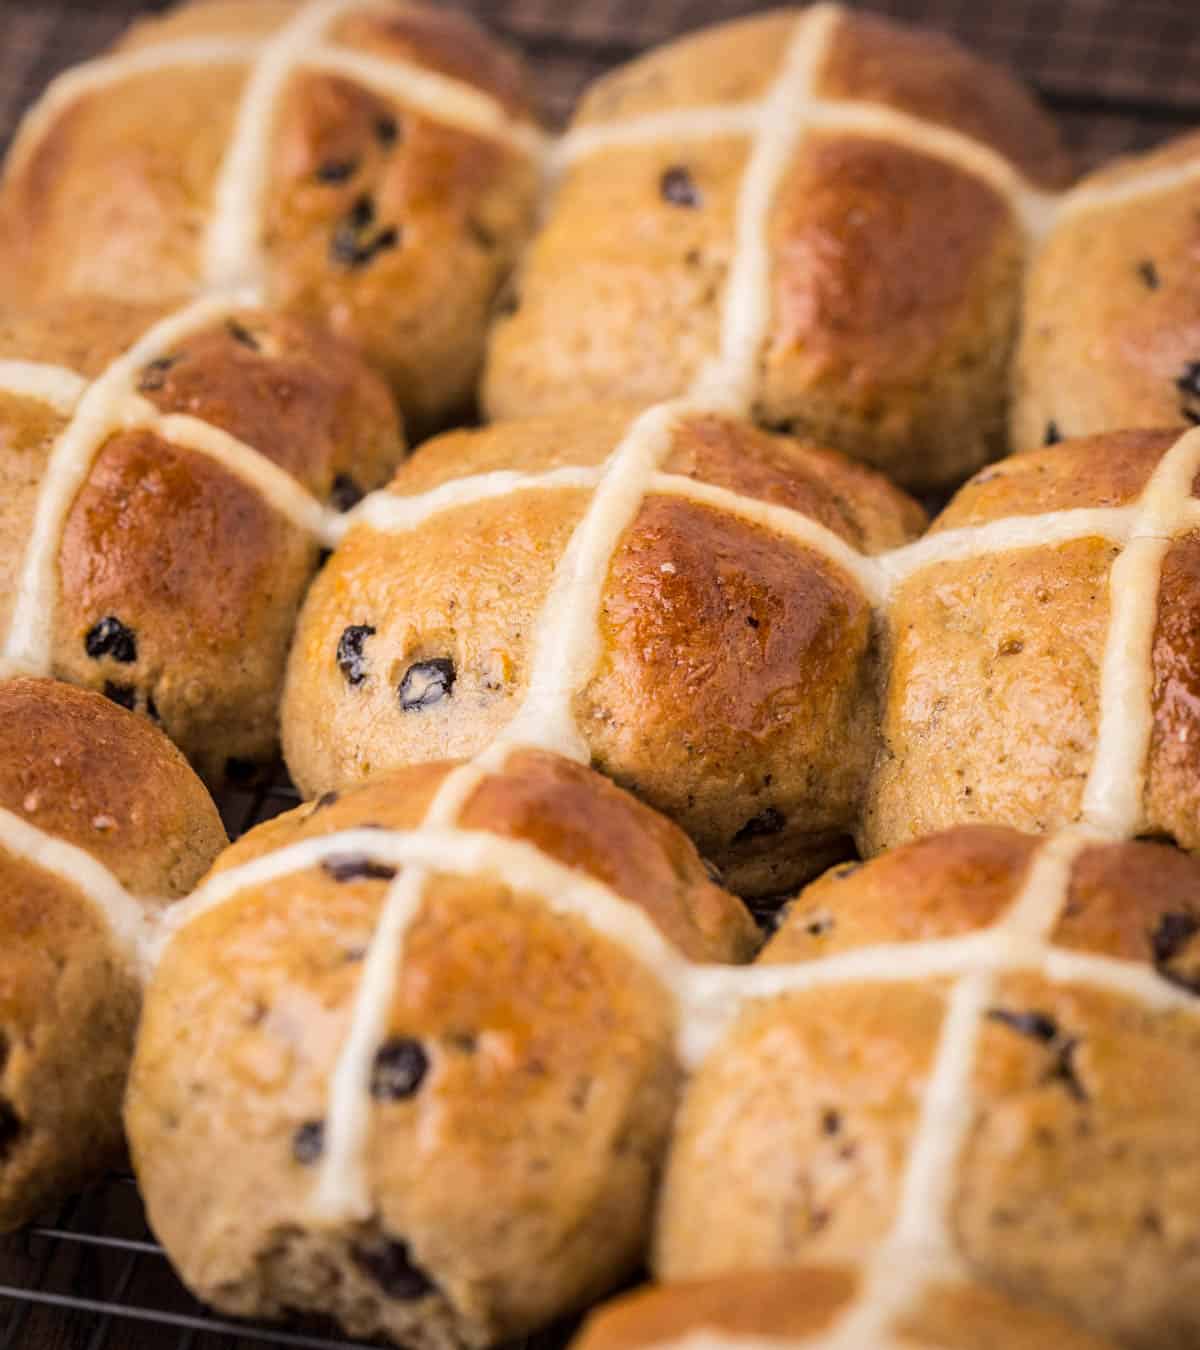 Hot Cross Buns packed together fresh from the oven.